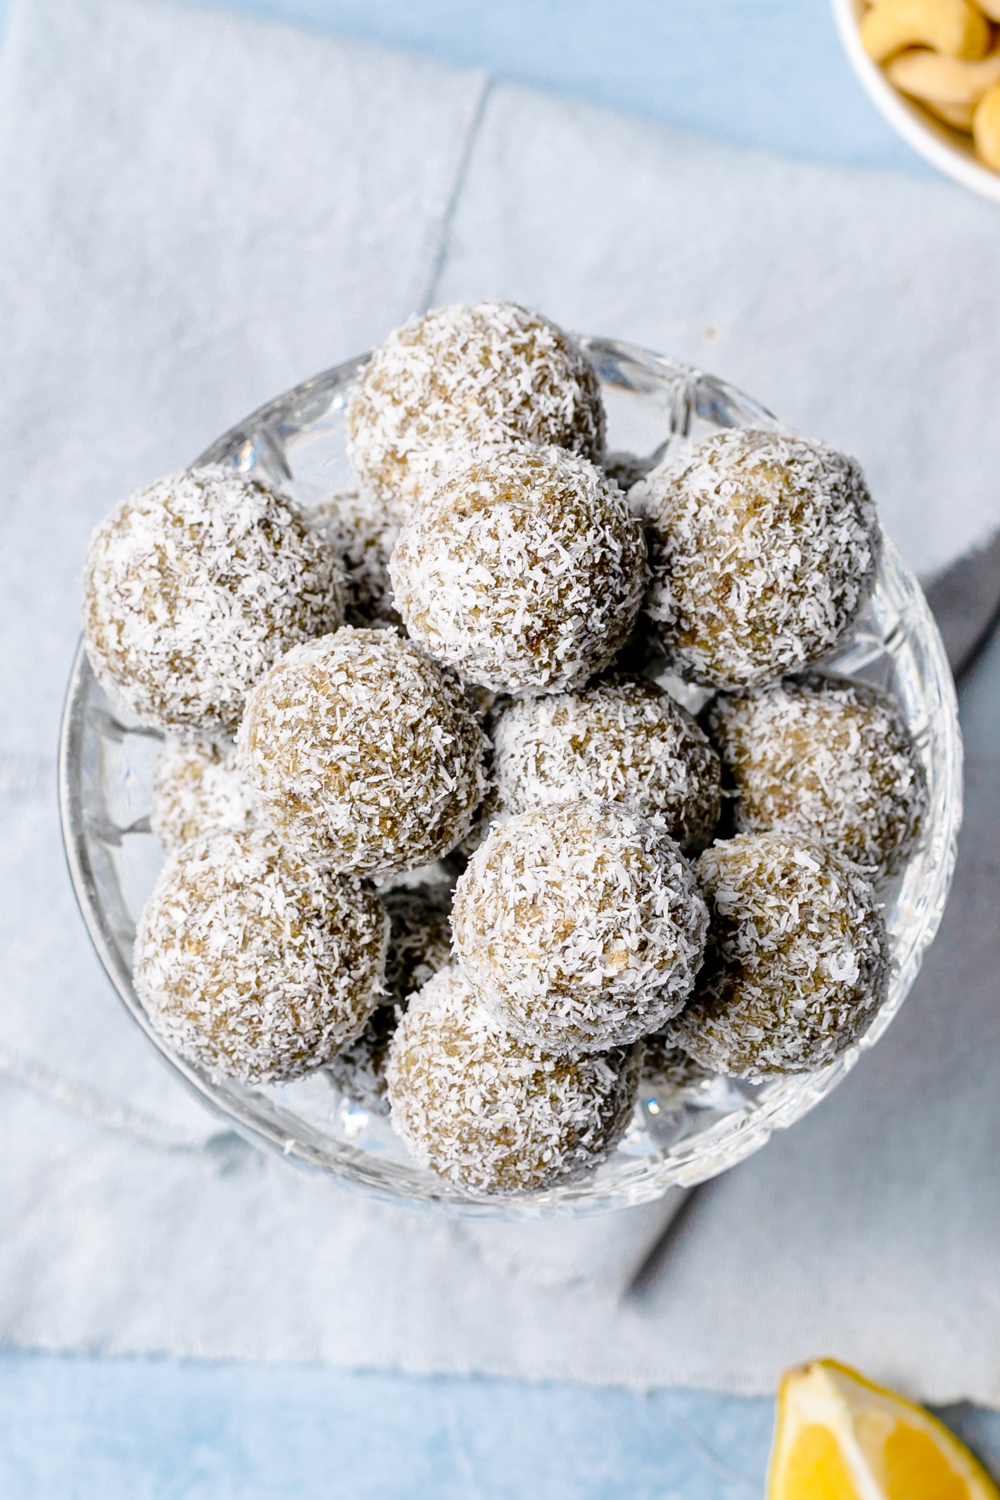 Top view of a small glass bowl filled with lemon cashew energy balls rolled in desiccated coconut